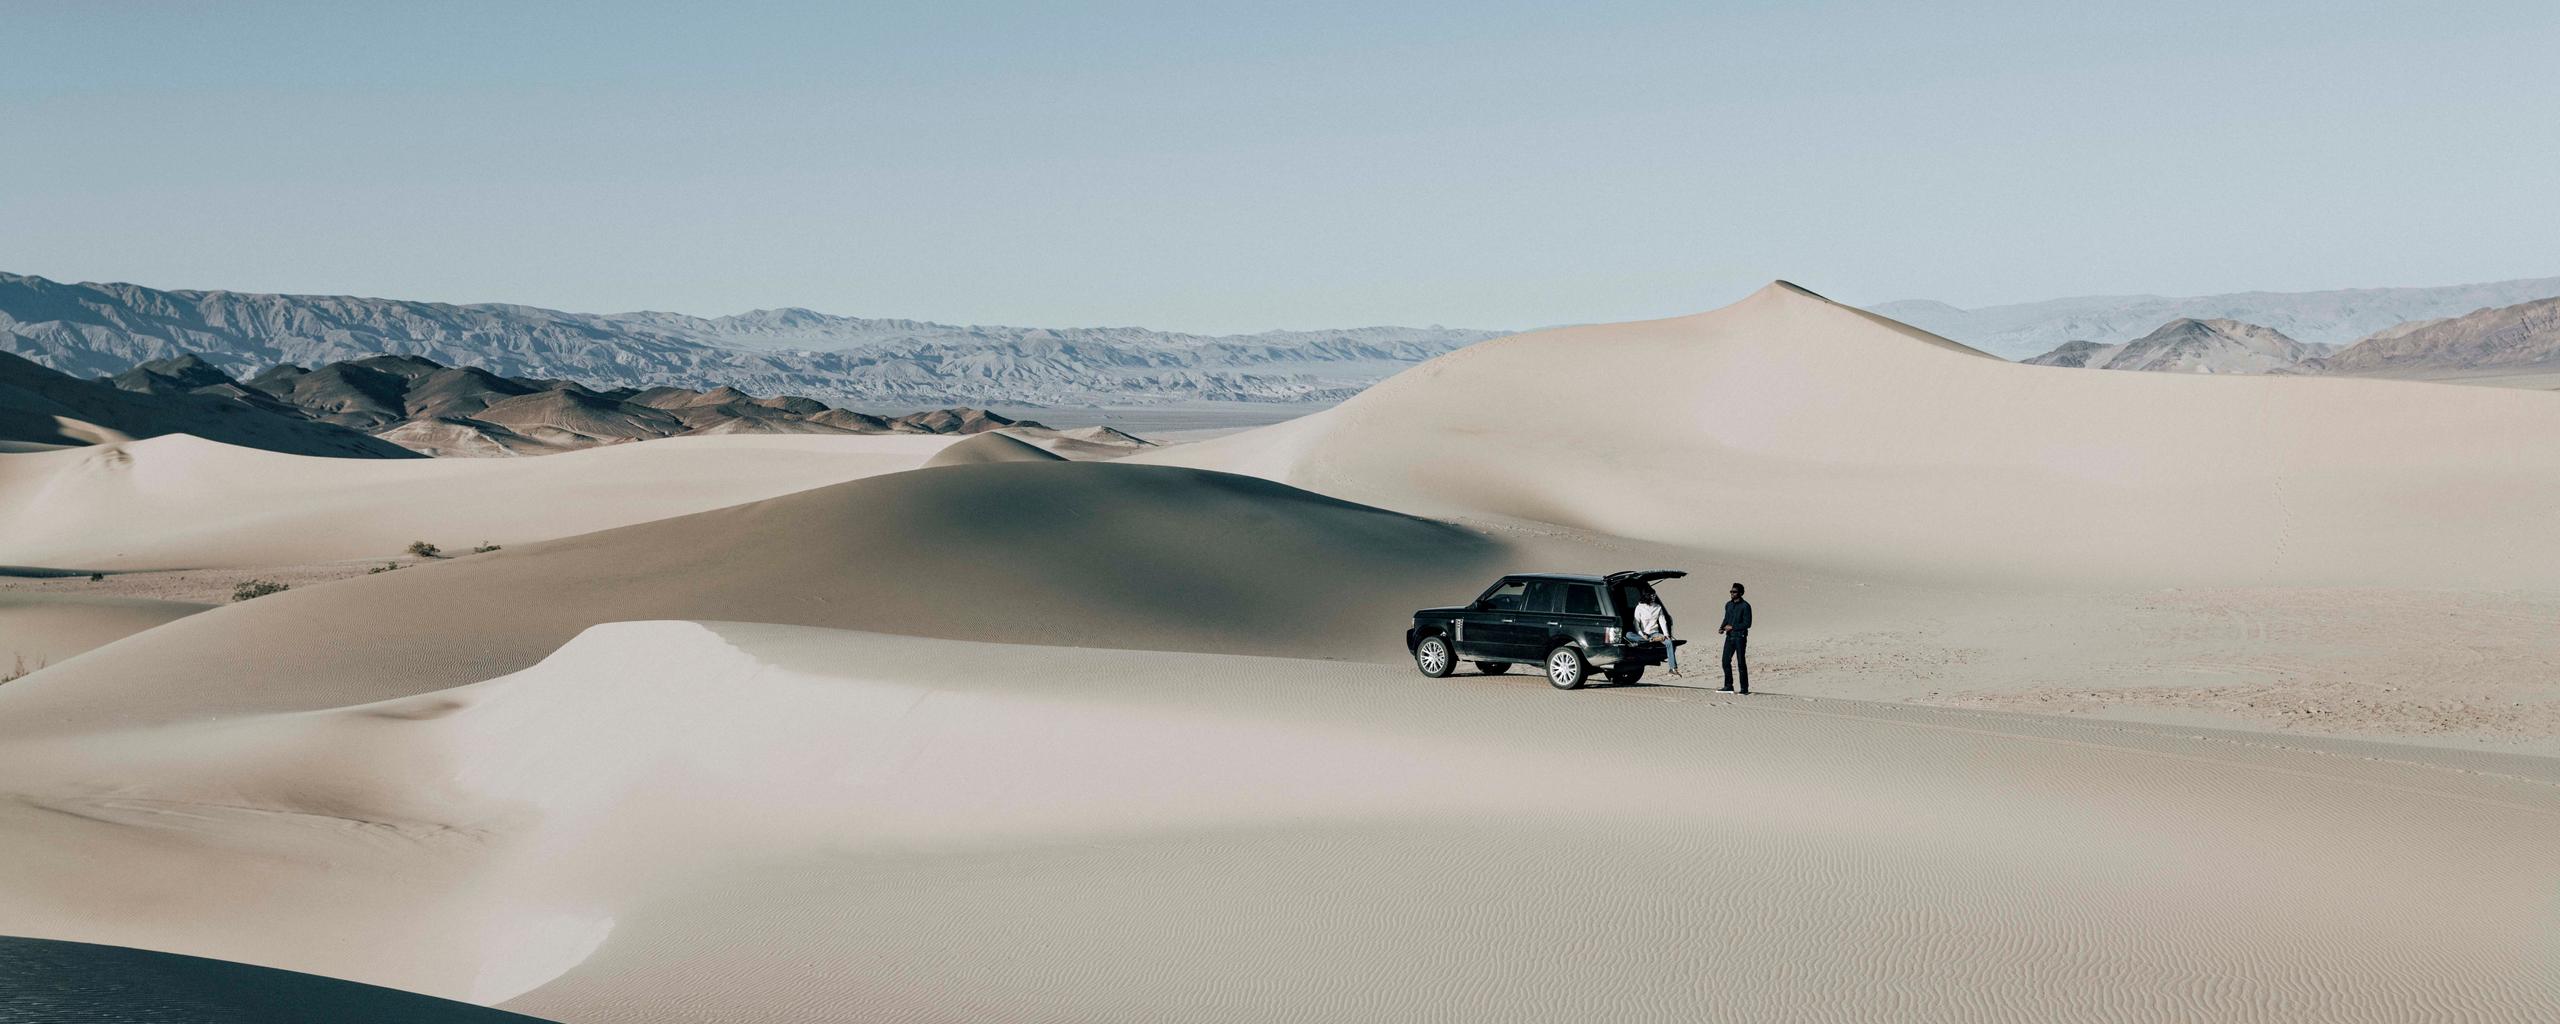 Landscape of desert sand dunes with man and woman outside Land Rover in the distance